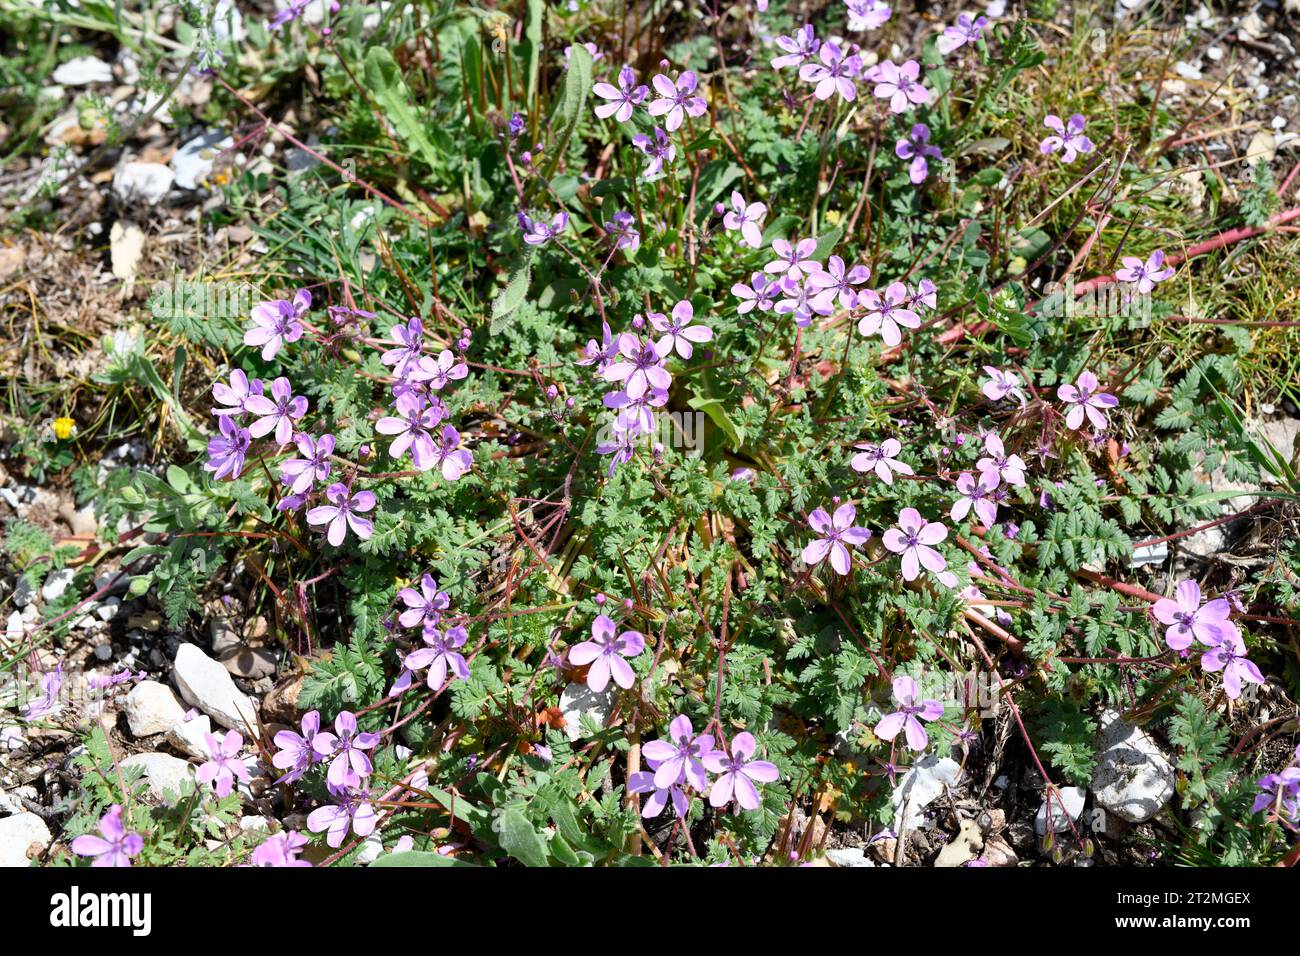 Erodium primulaceum is an annual herb native to Iberian Peninsula and Morocco. This photo was taken in Sierra de Ronda, Málaga, Andalusia, Spain. Stock Photo